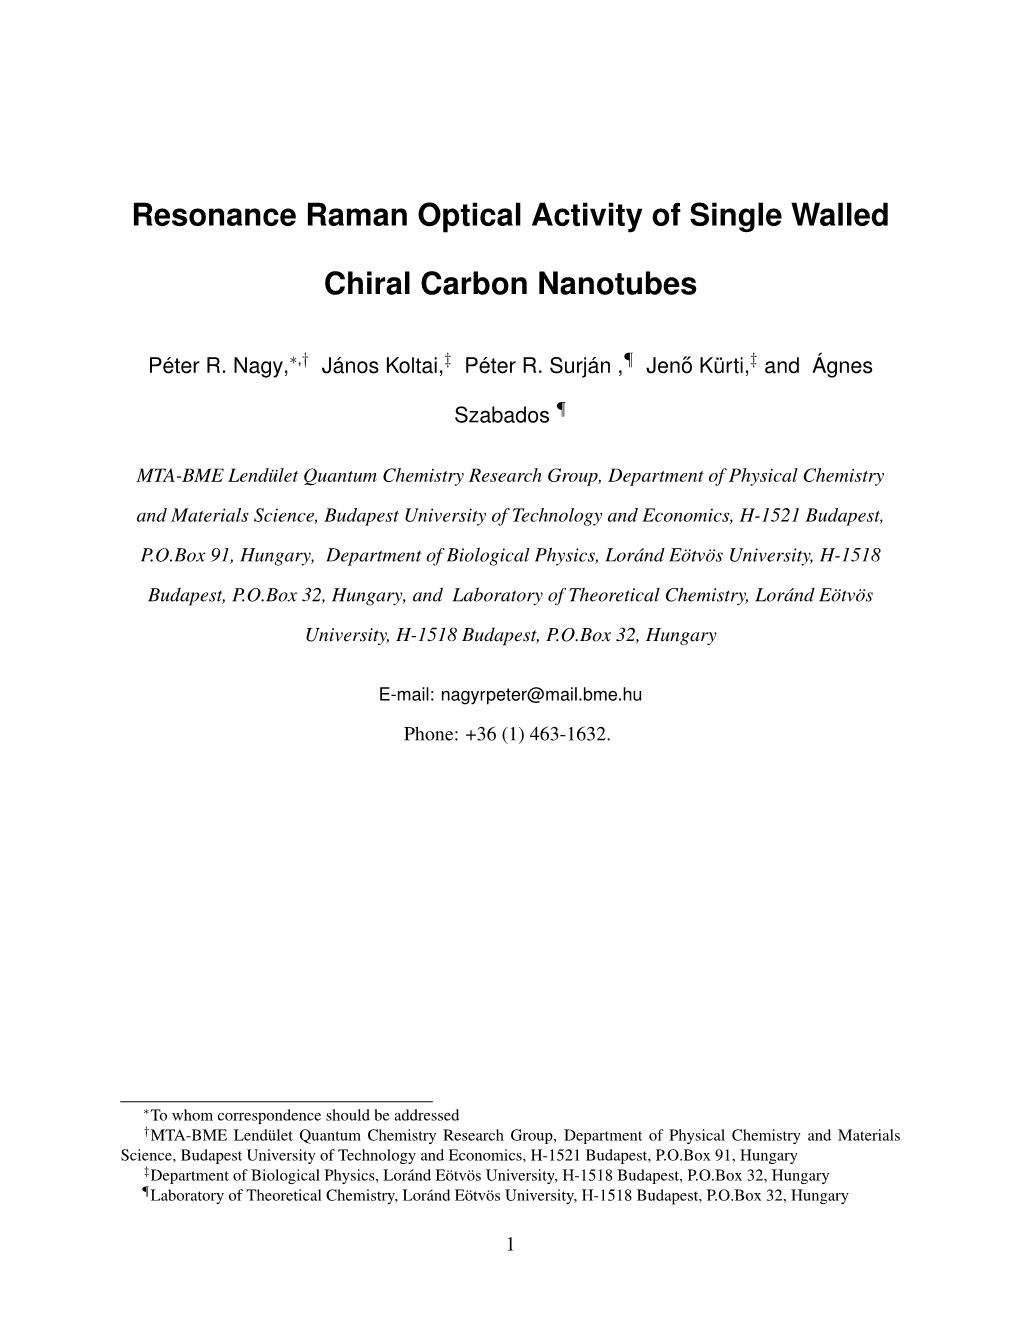 Resonance Raman Optical Activity of Single Walled Chiral Carbon